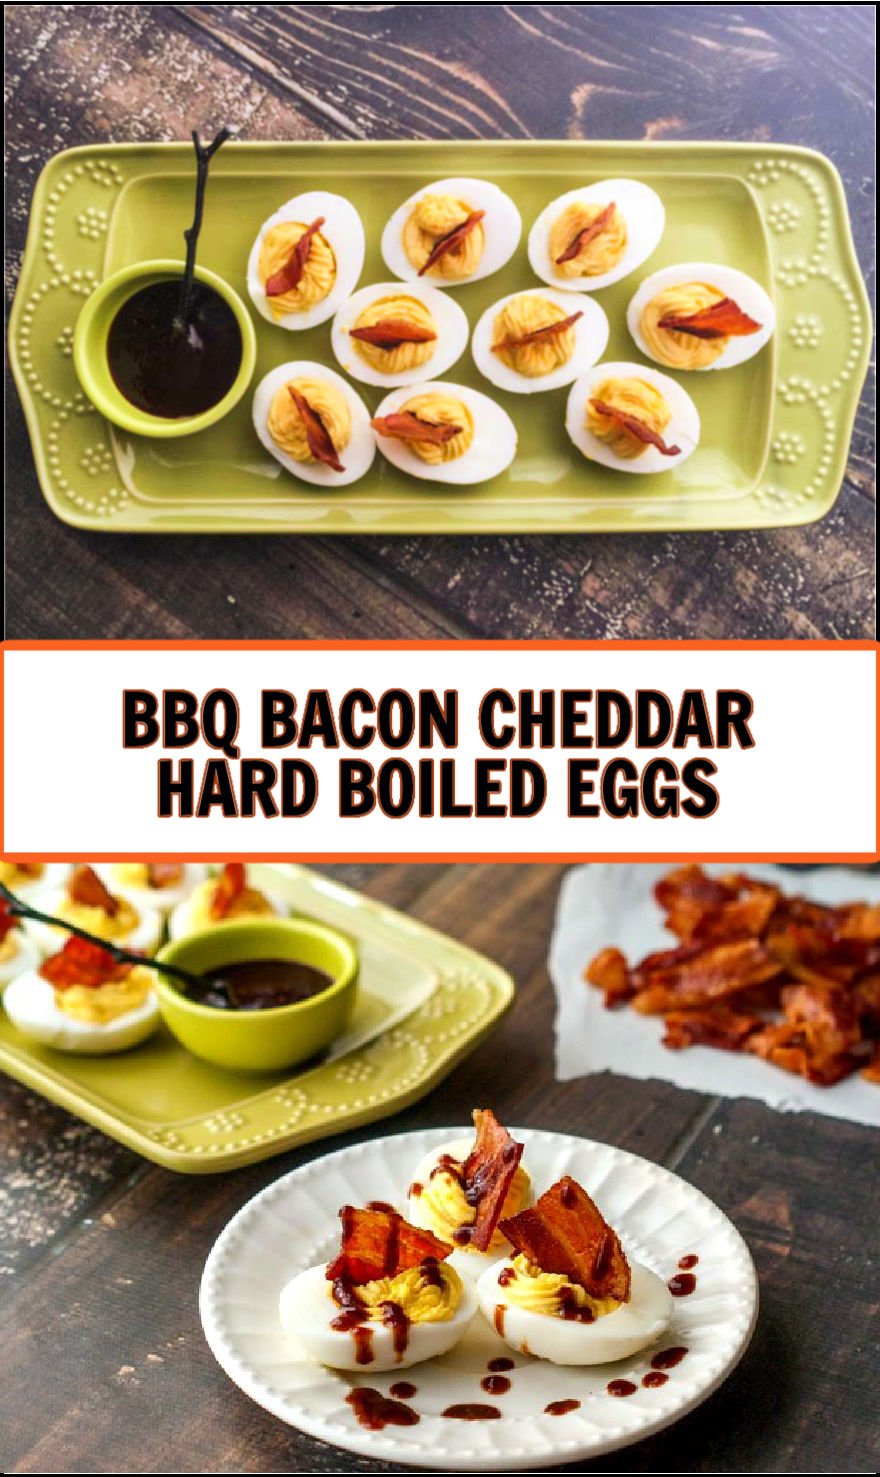 plates of bbq bacon hard boiled eggs with text